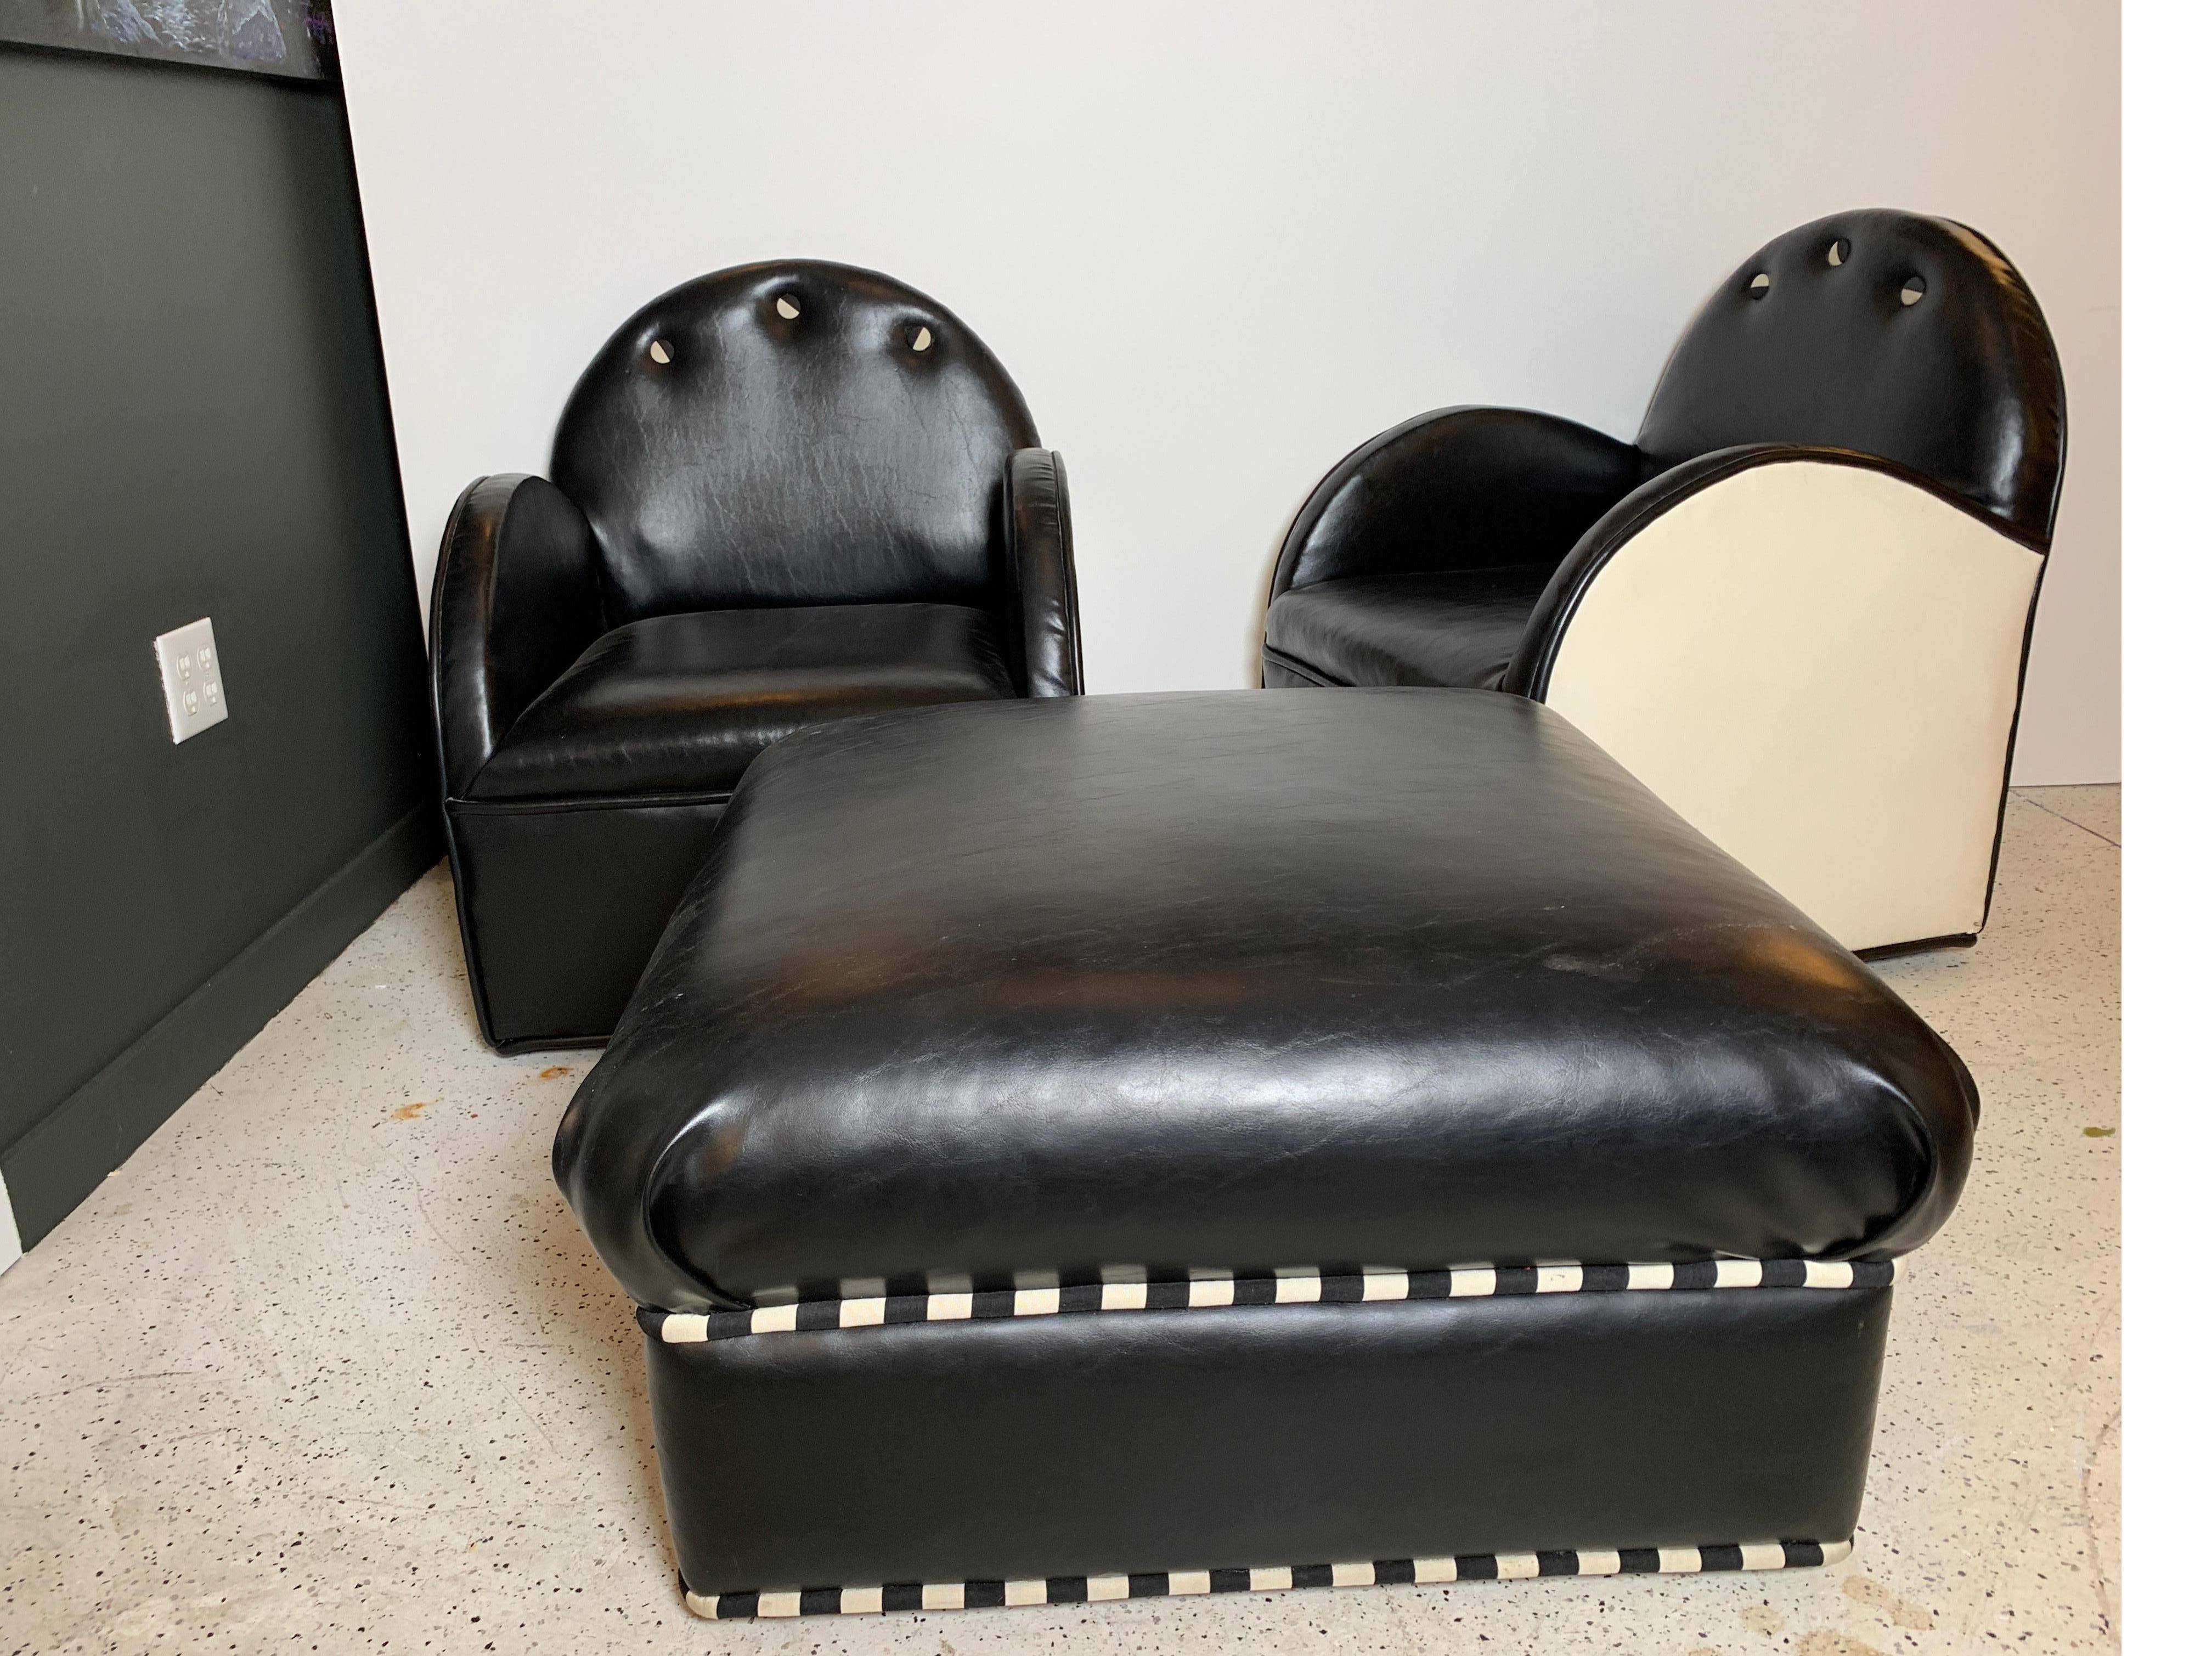 A pair of black and white cub chairs with over sized ottoman. The smaller club chairs with rounded backs and arms paired with a large square ottoman. The ottoman measures 30 inches Square and 17 inches tall. The chairs are 26.5 wide, 32 high, 25